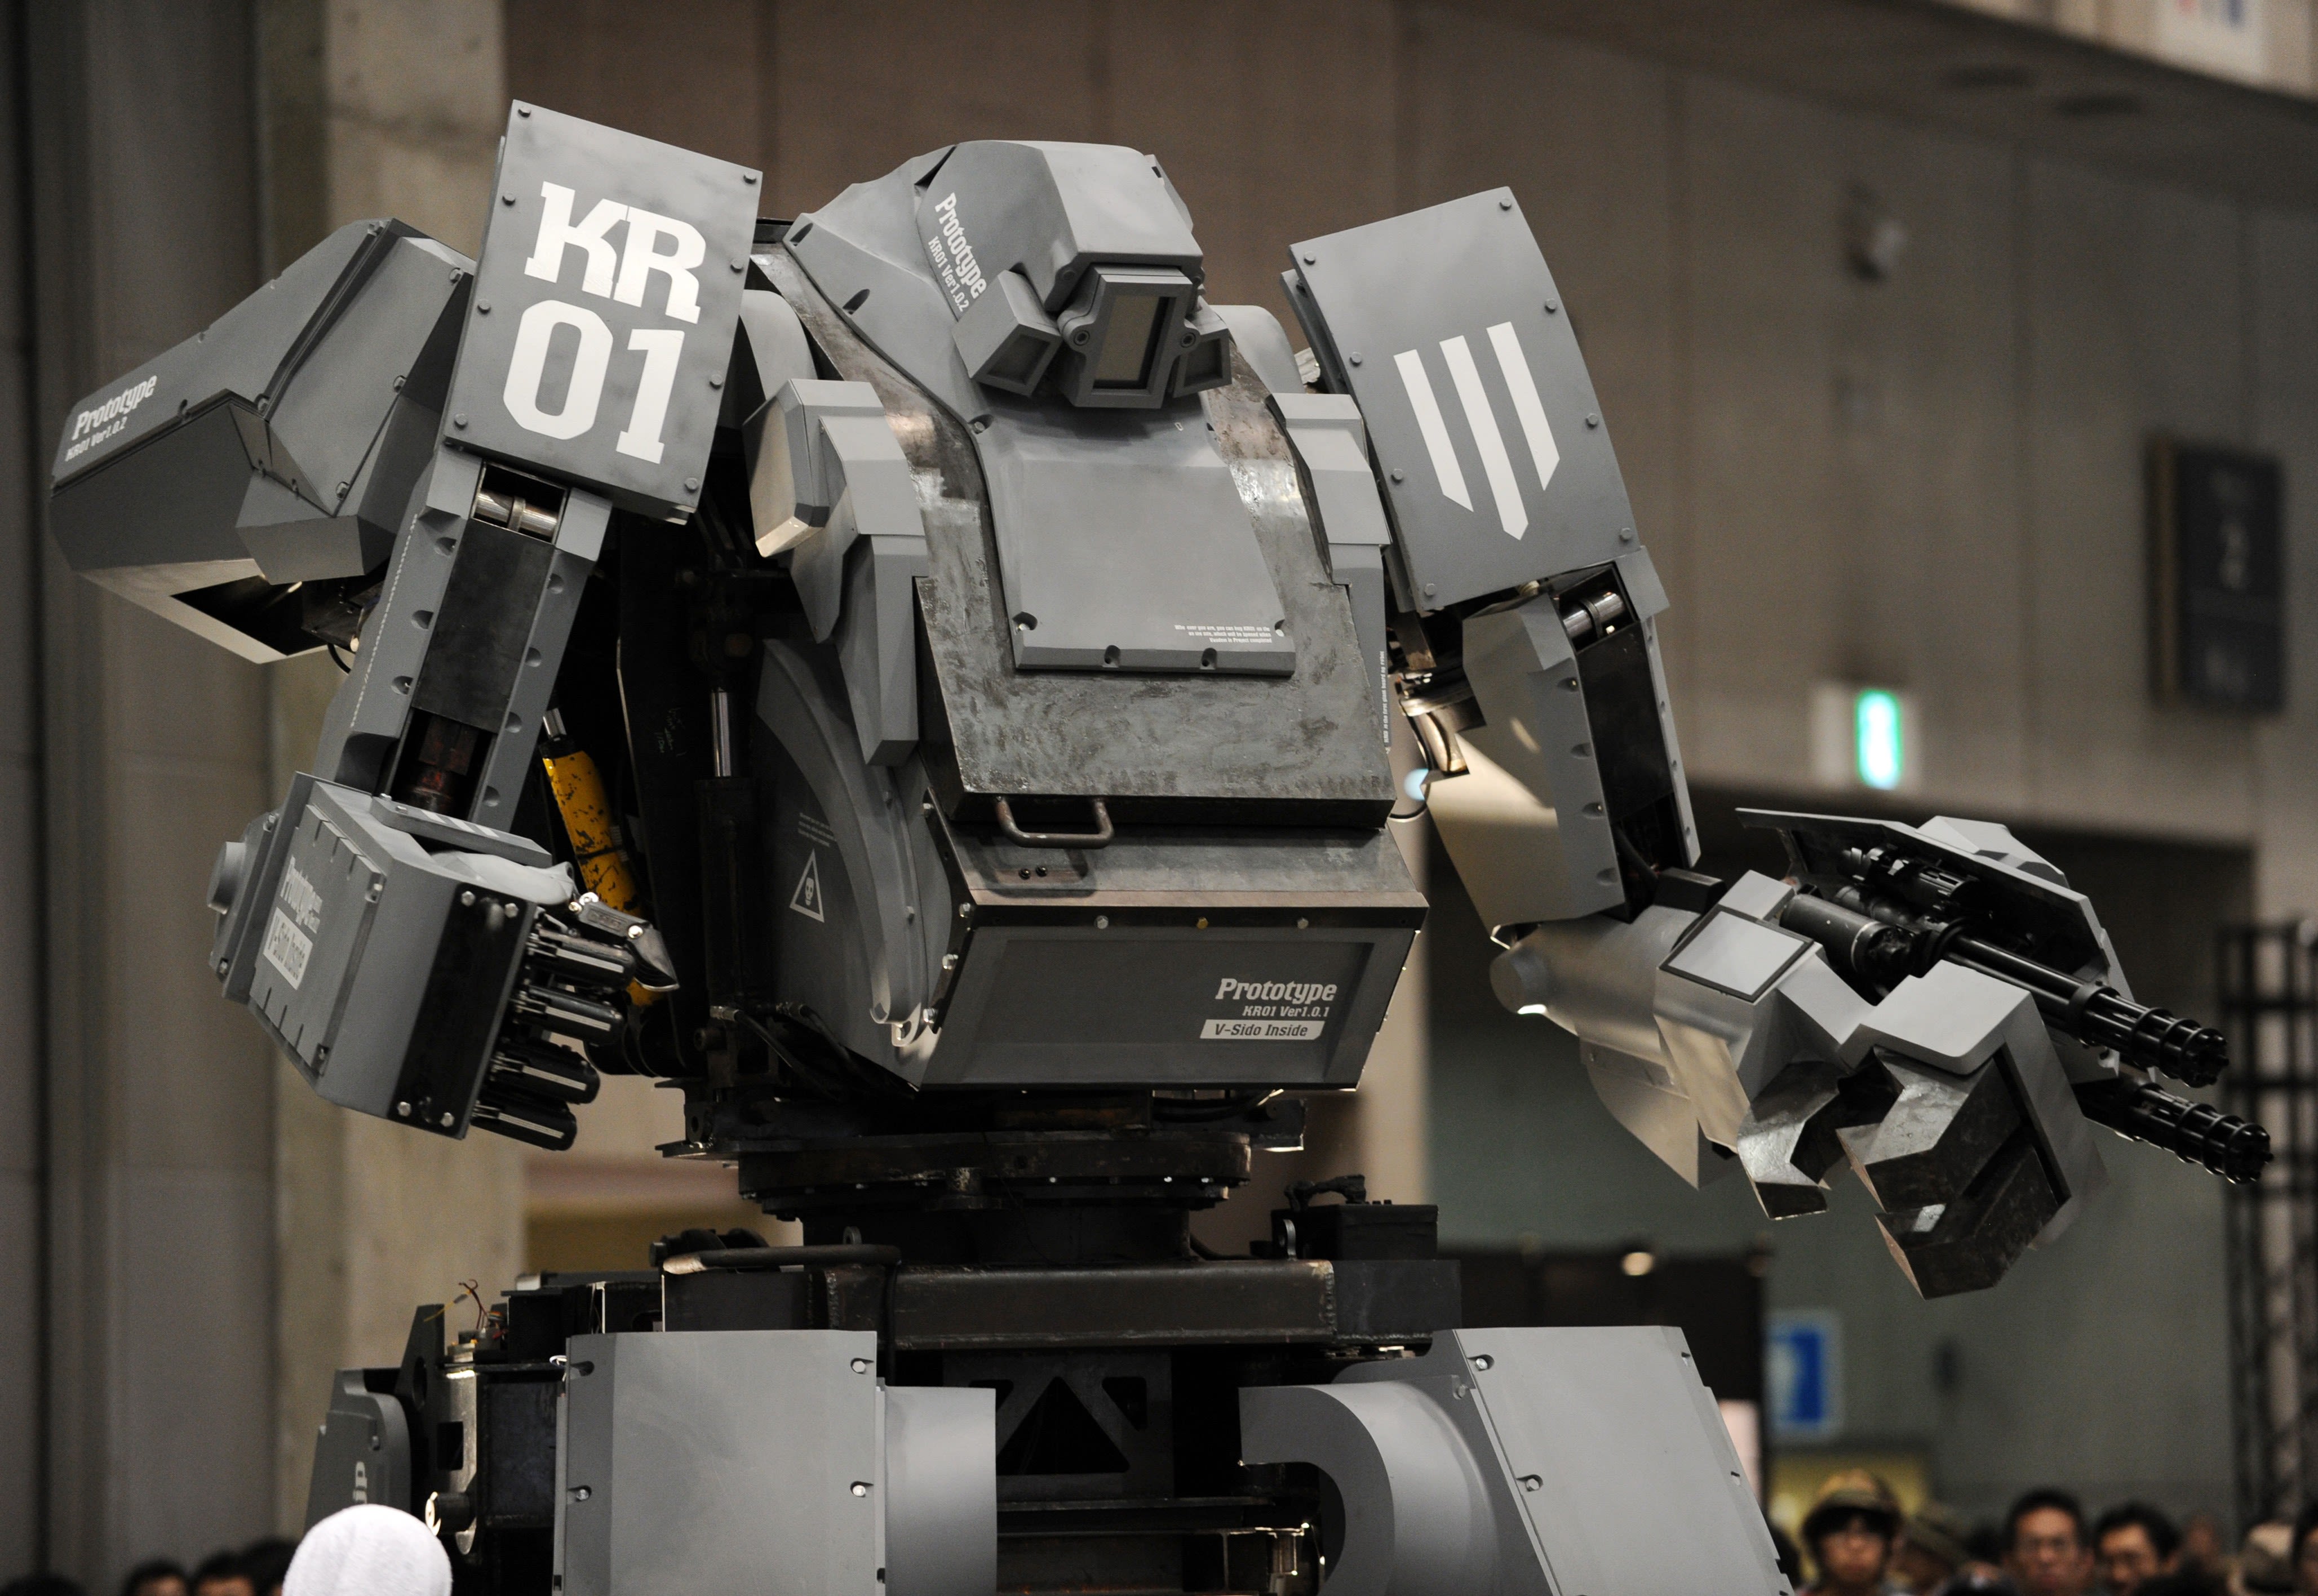 June 2016: America and Japan to face off in giant robot combat